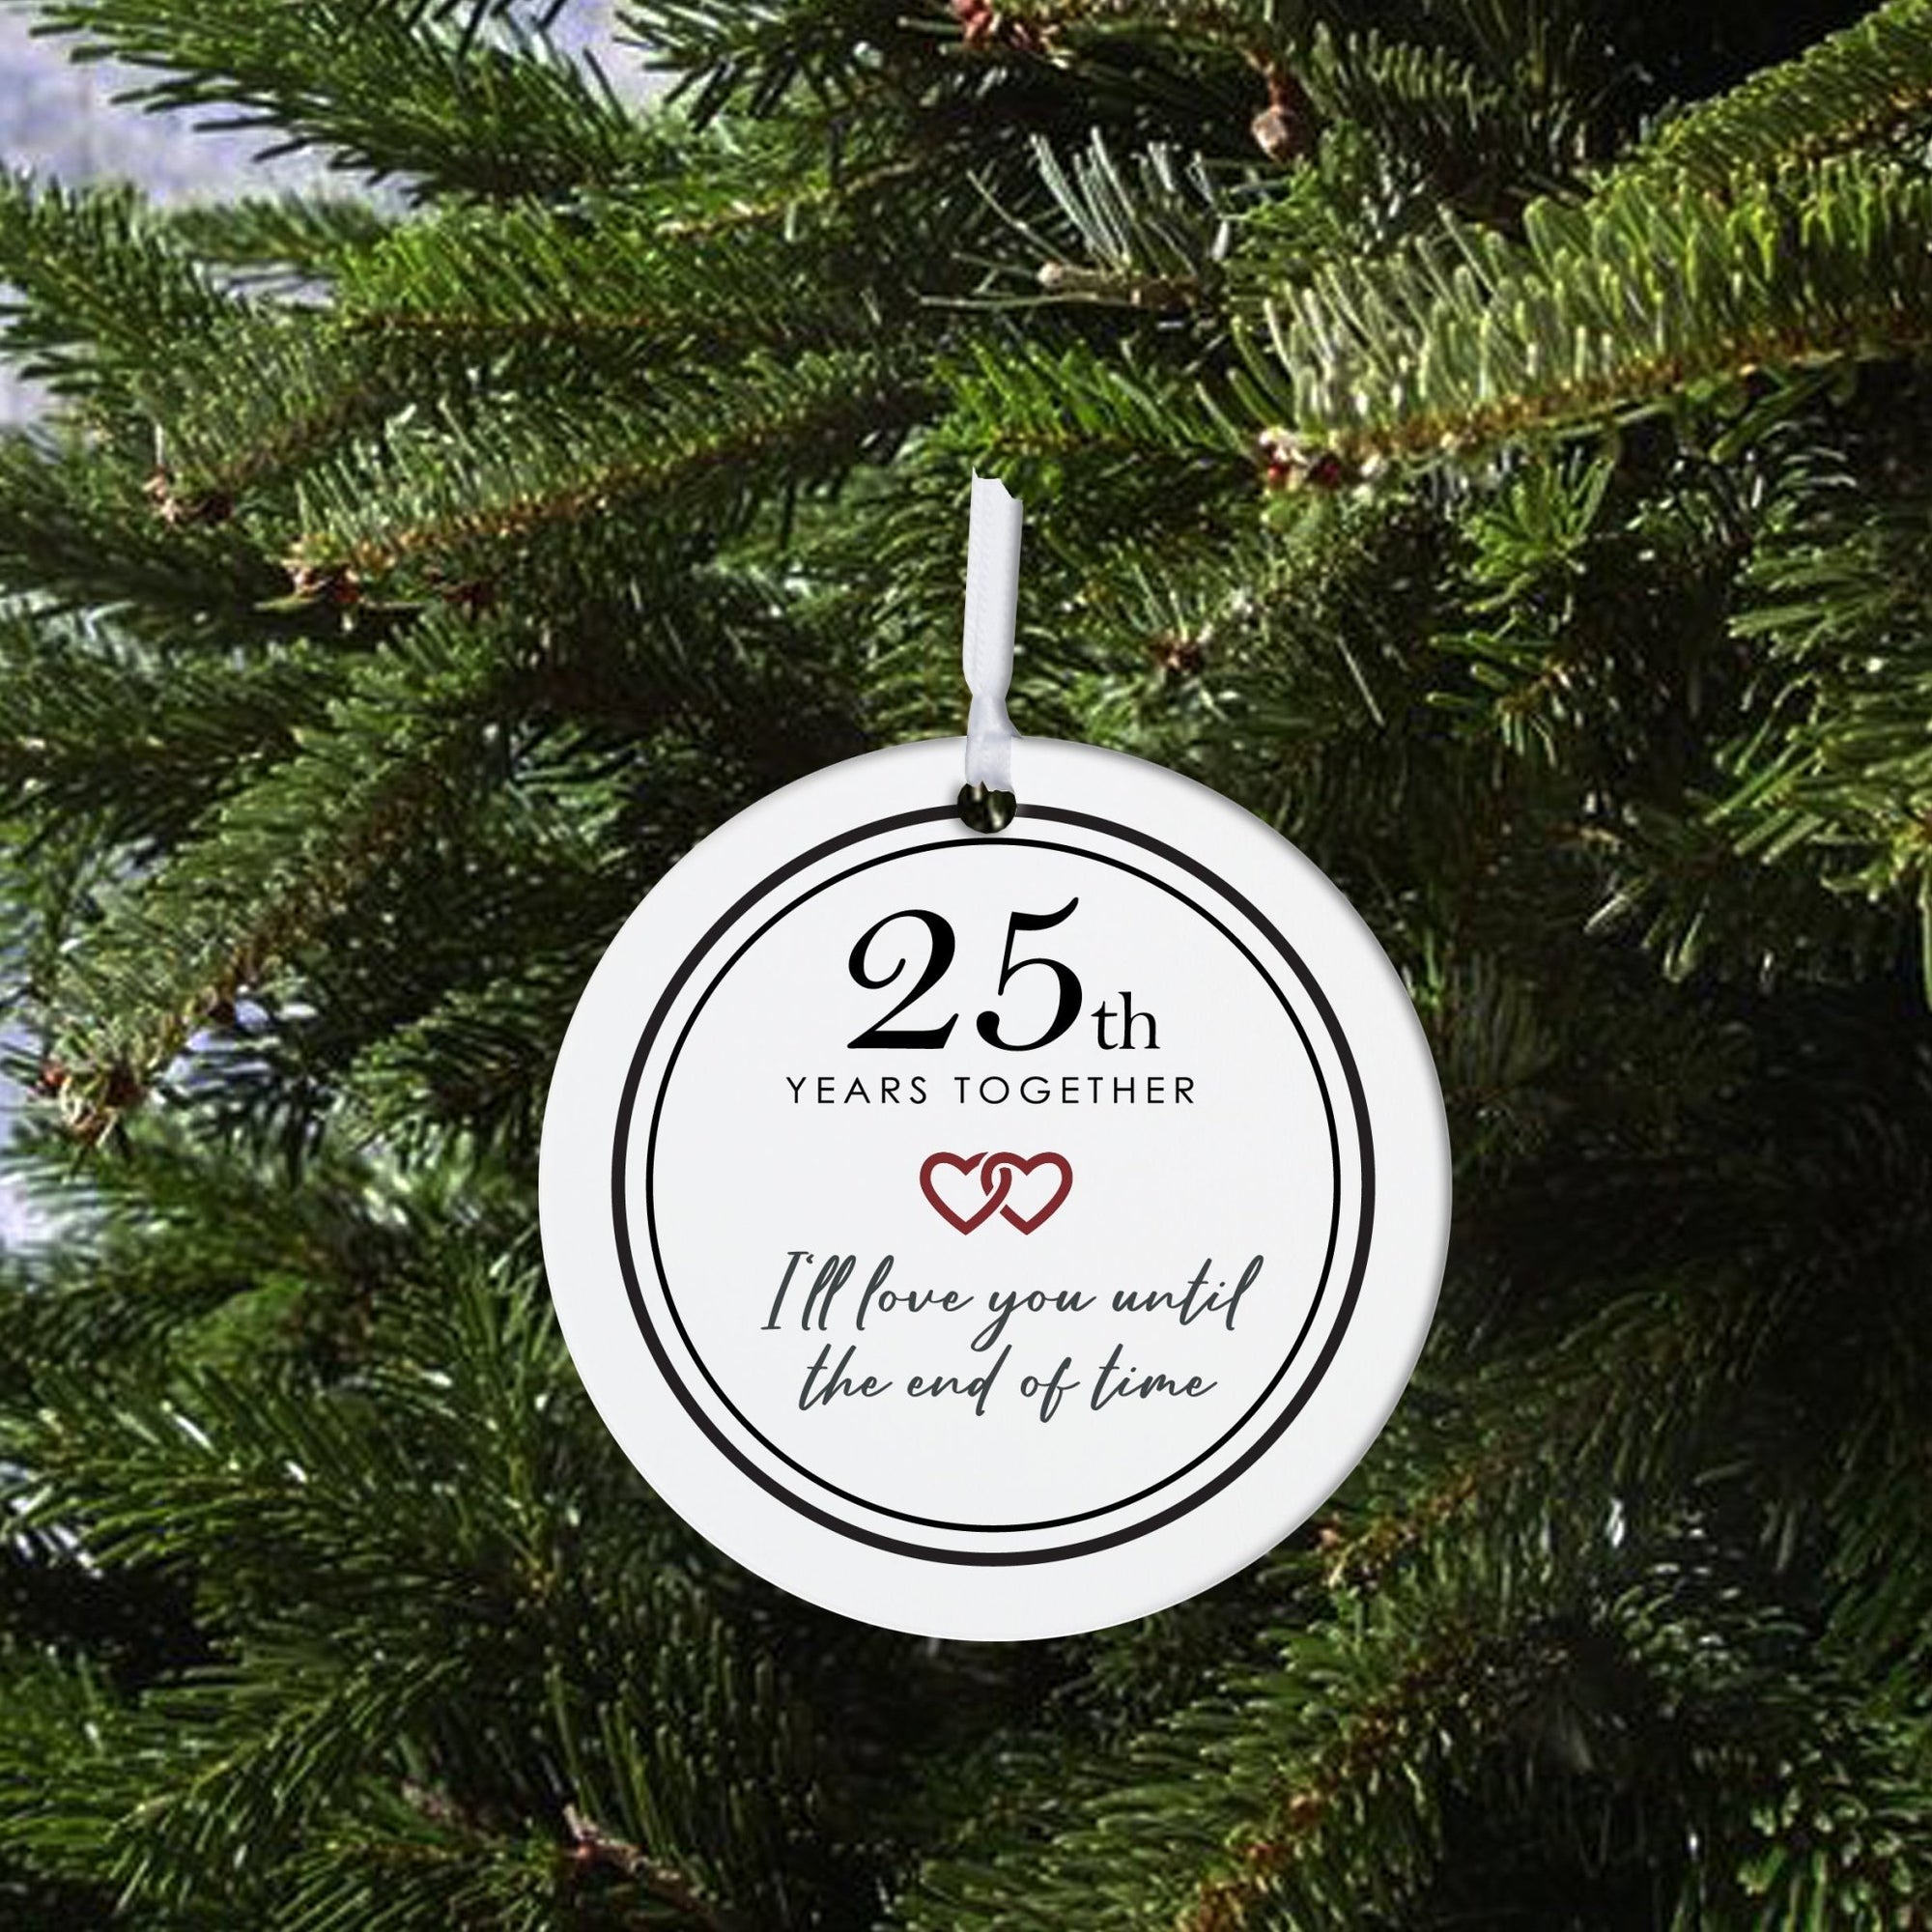 25th-Year Together Wedding Anniversary White Ornament With Inspirational Message Gift Ideas - I Love You Till The End Of Time - LifeSong Milestones